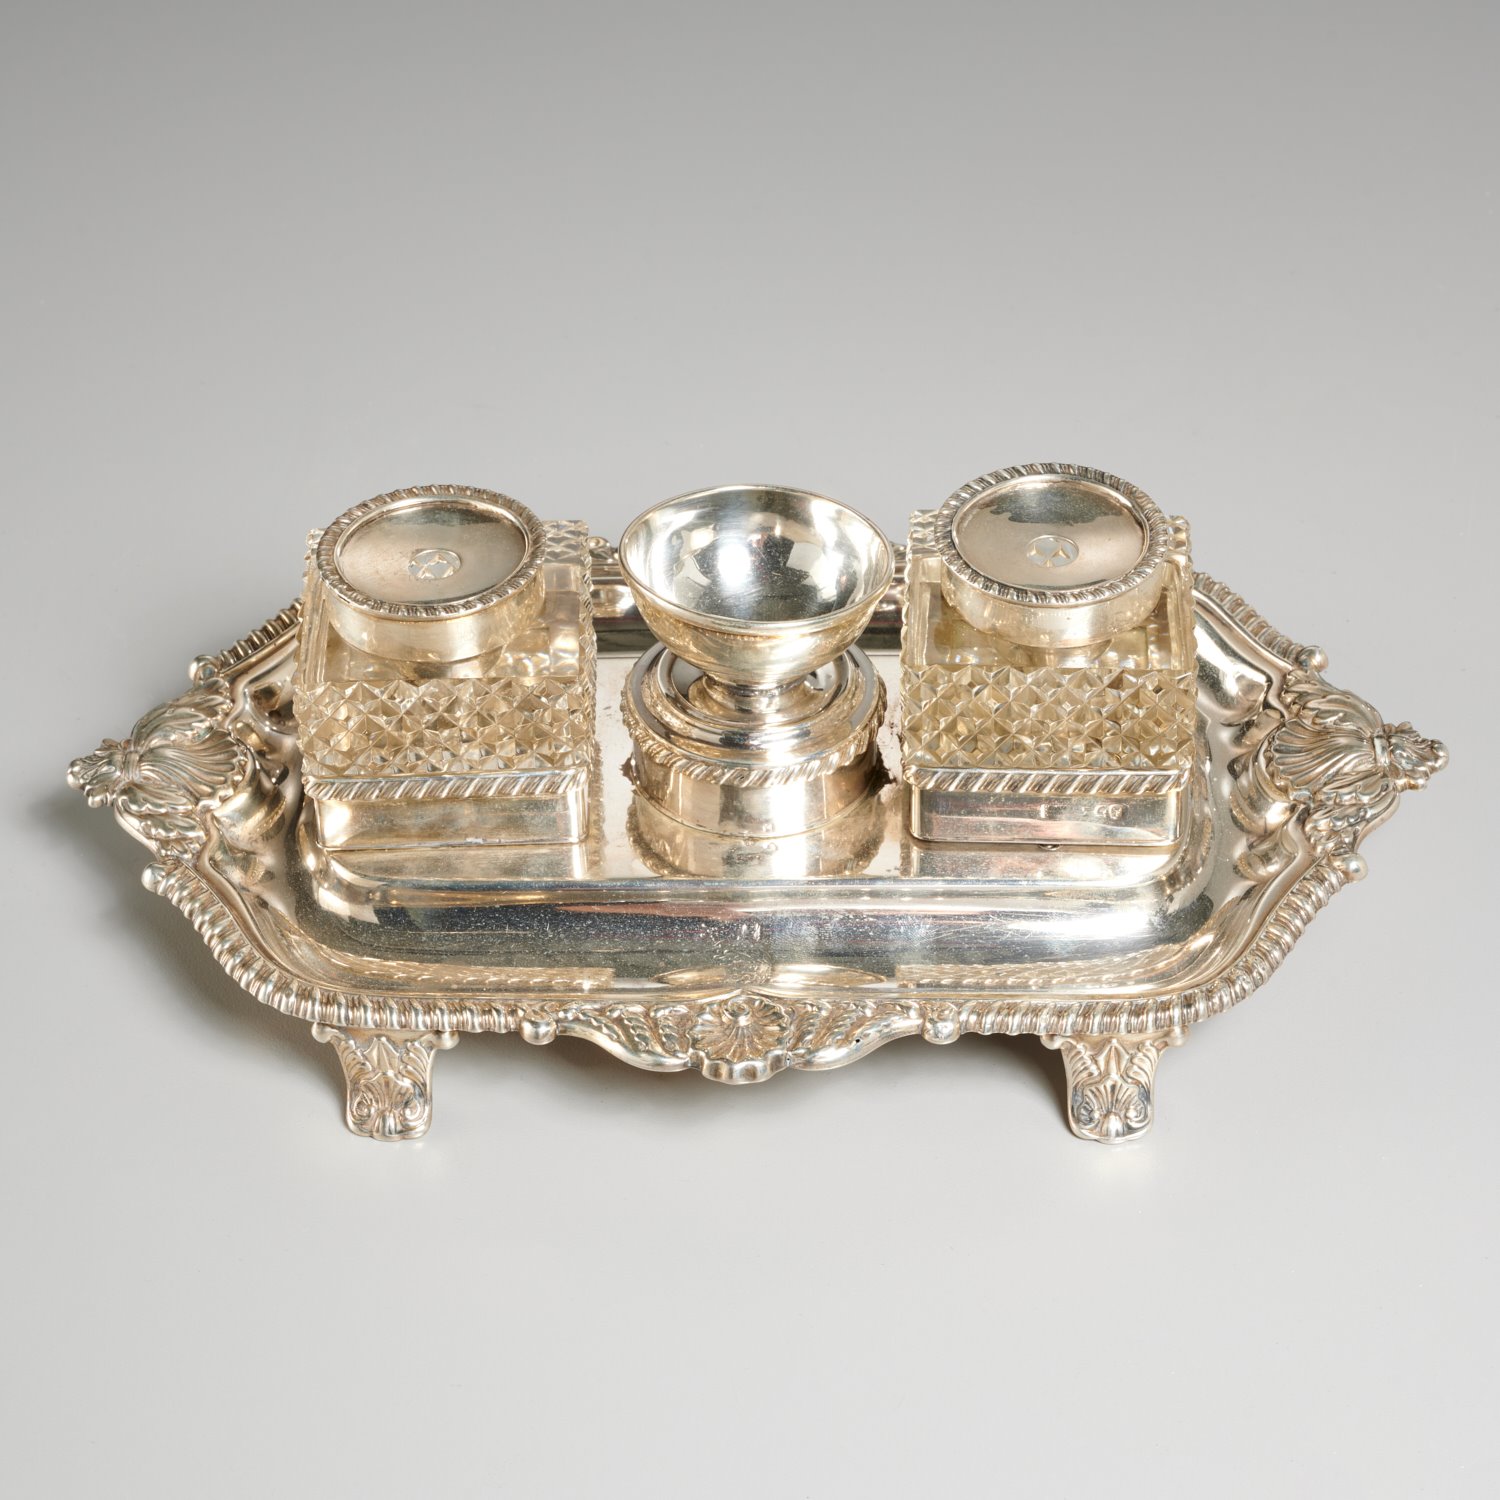 GEORGE IV STERLING SILVER INKSTAND 2a5d9c